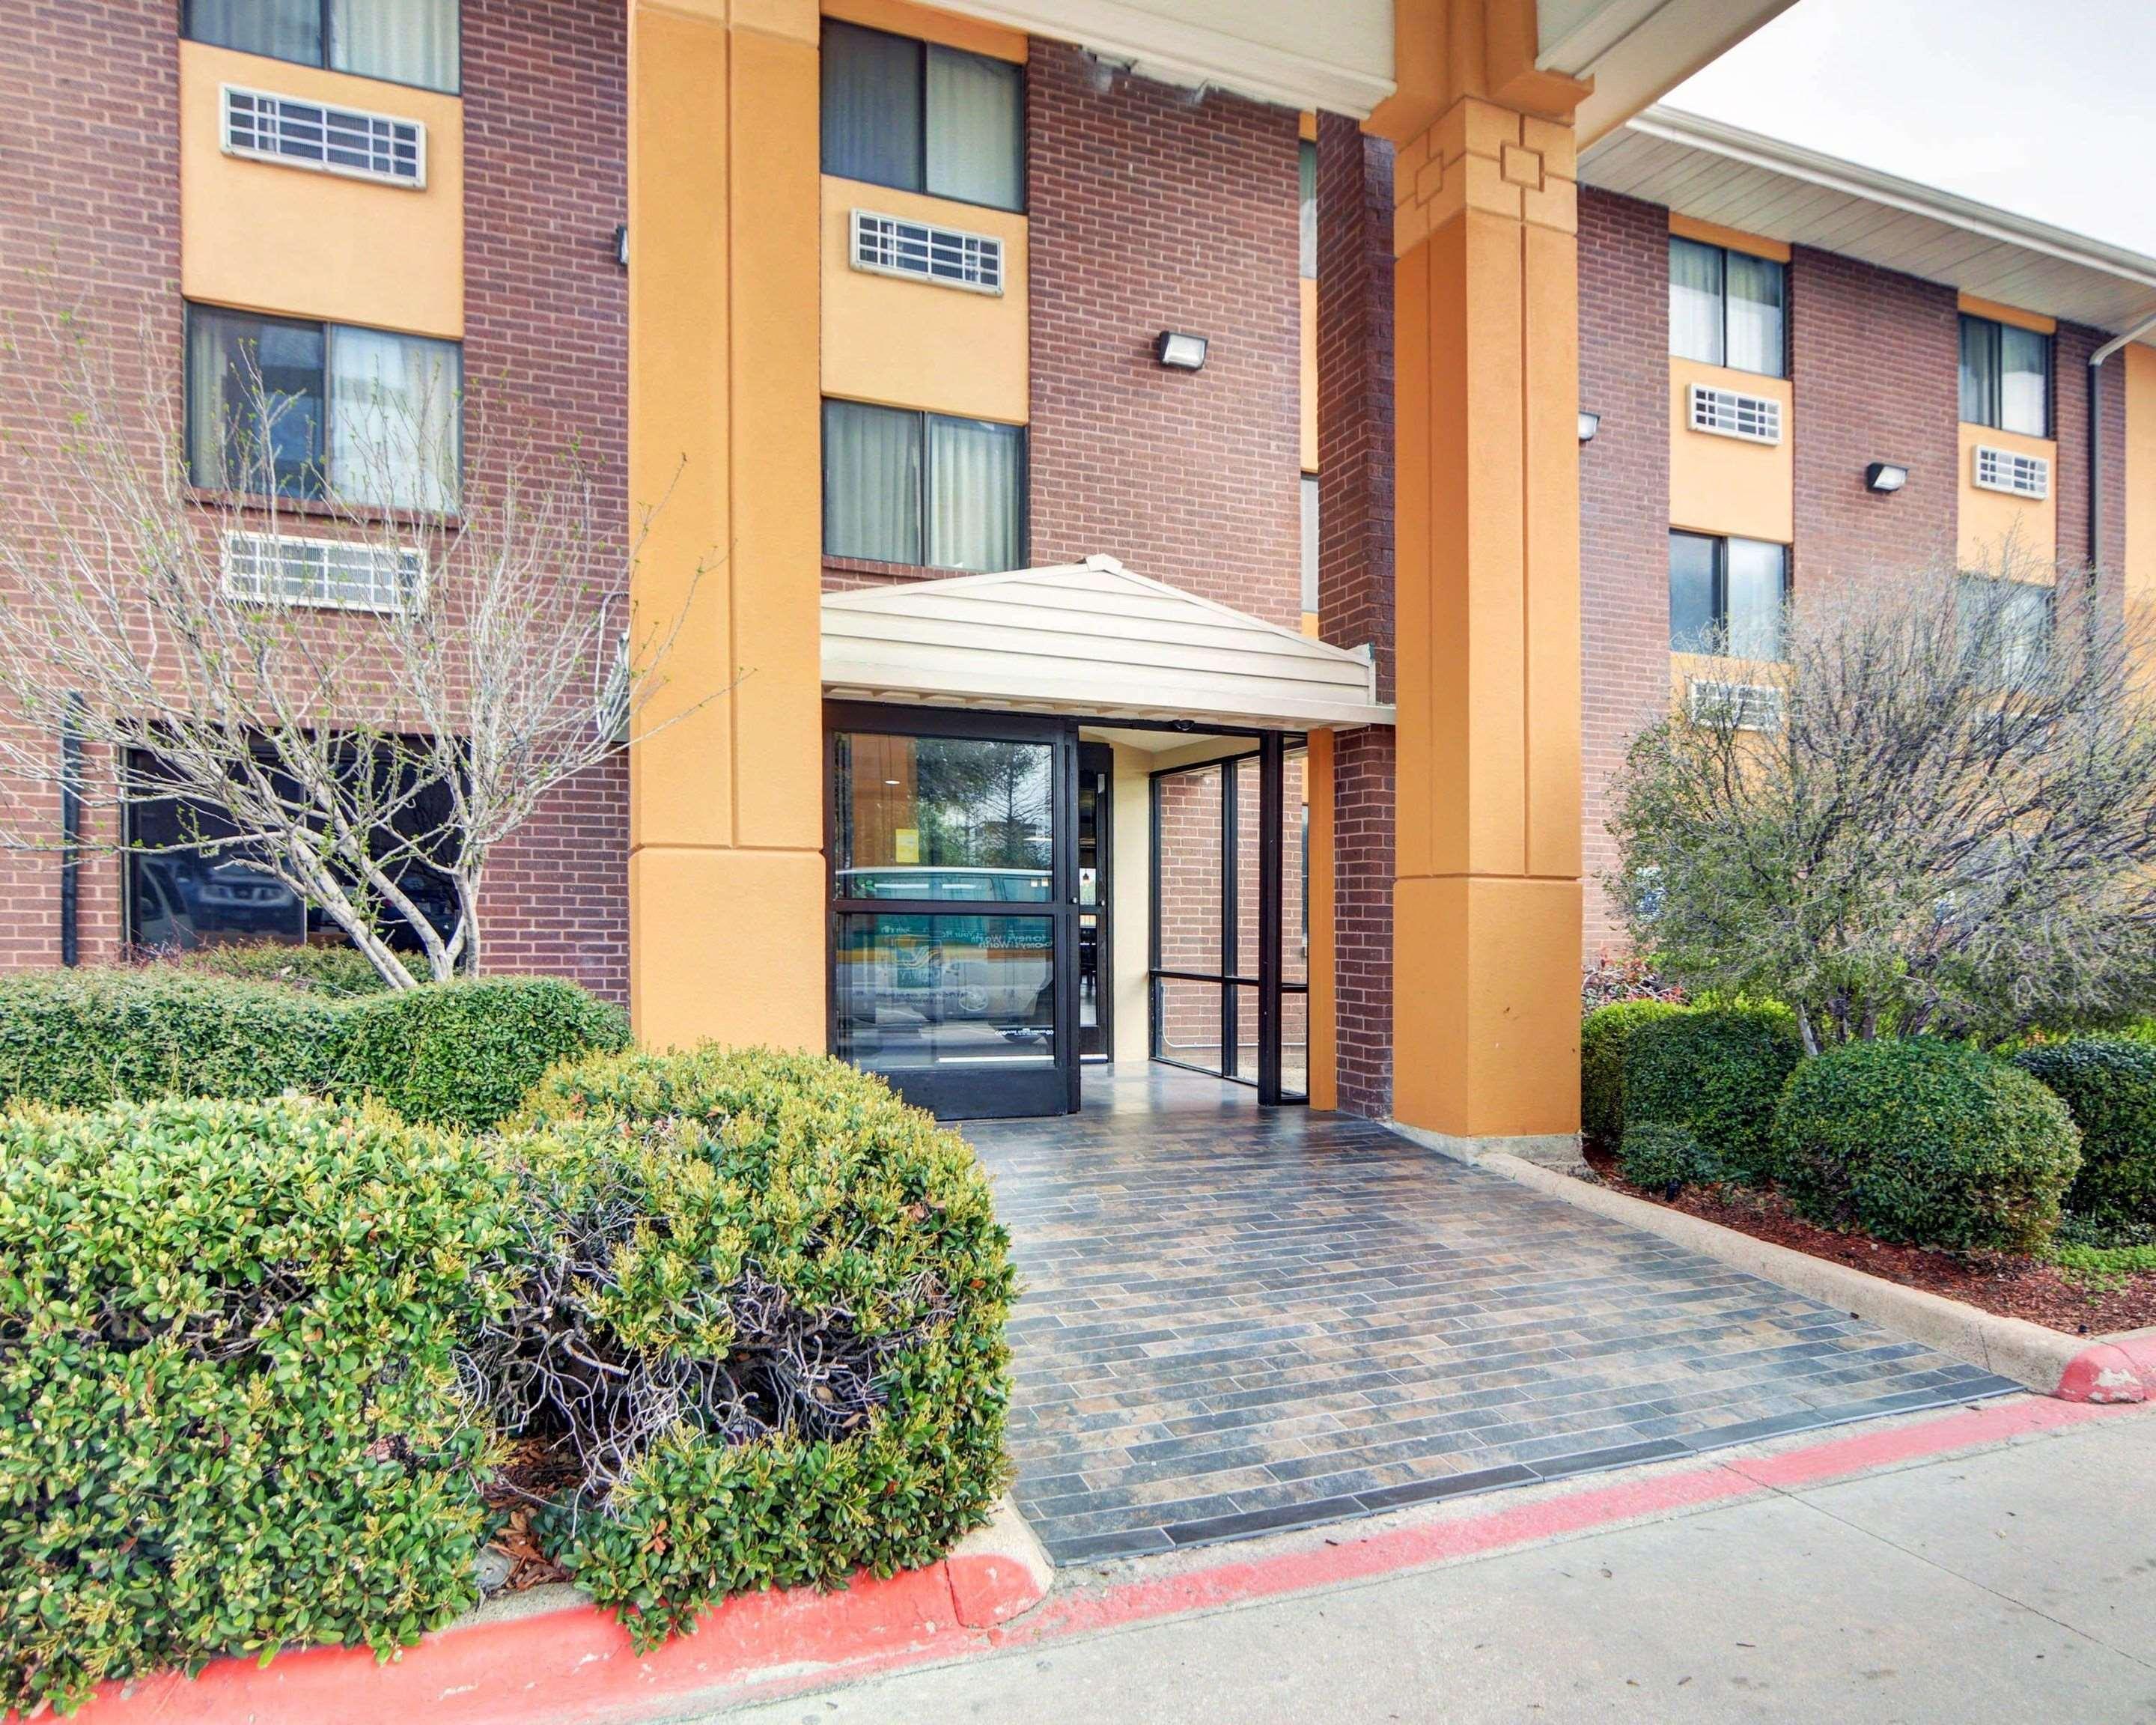 Quality Inn Dfw Airport North - Irving Exterior foto